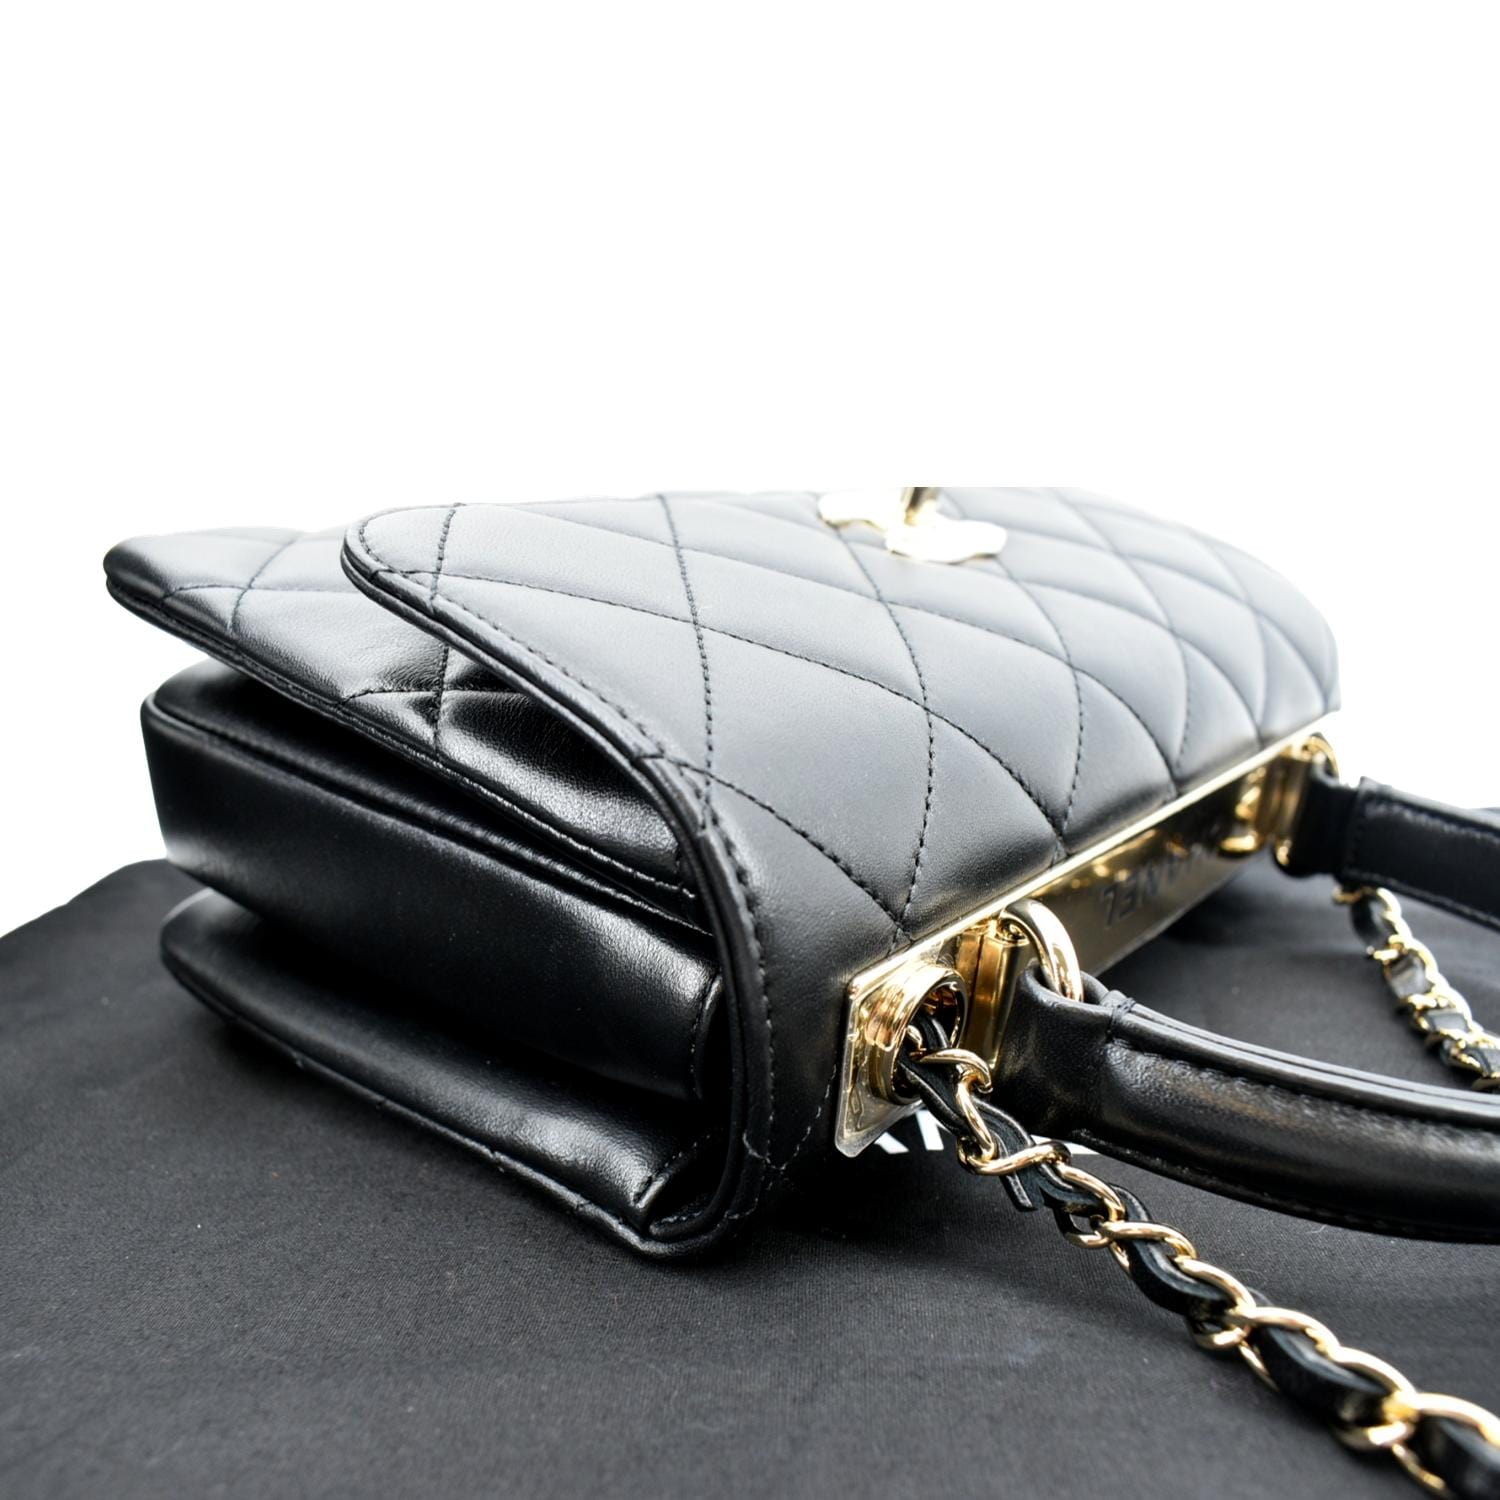 Chanel Trendy CC Flap Bag with Top Handle in Black Lambskin